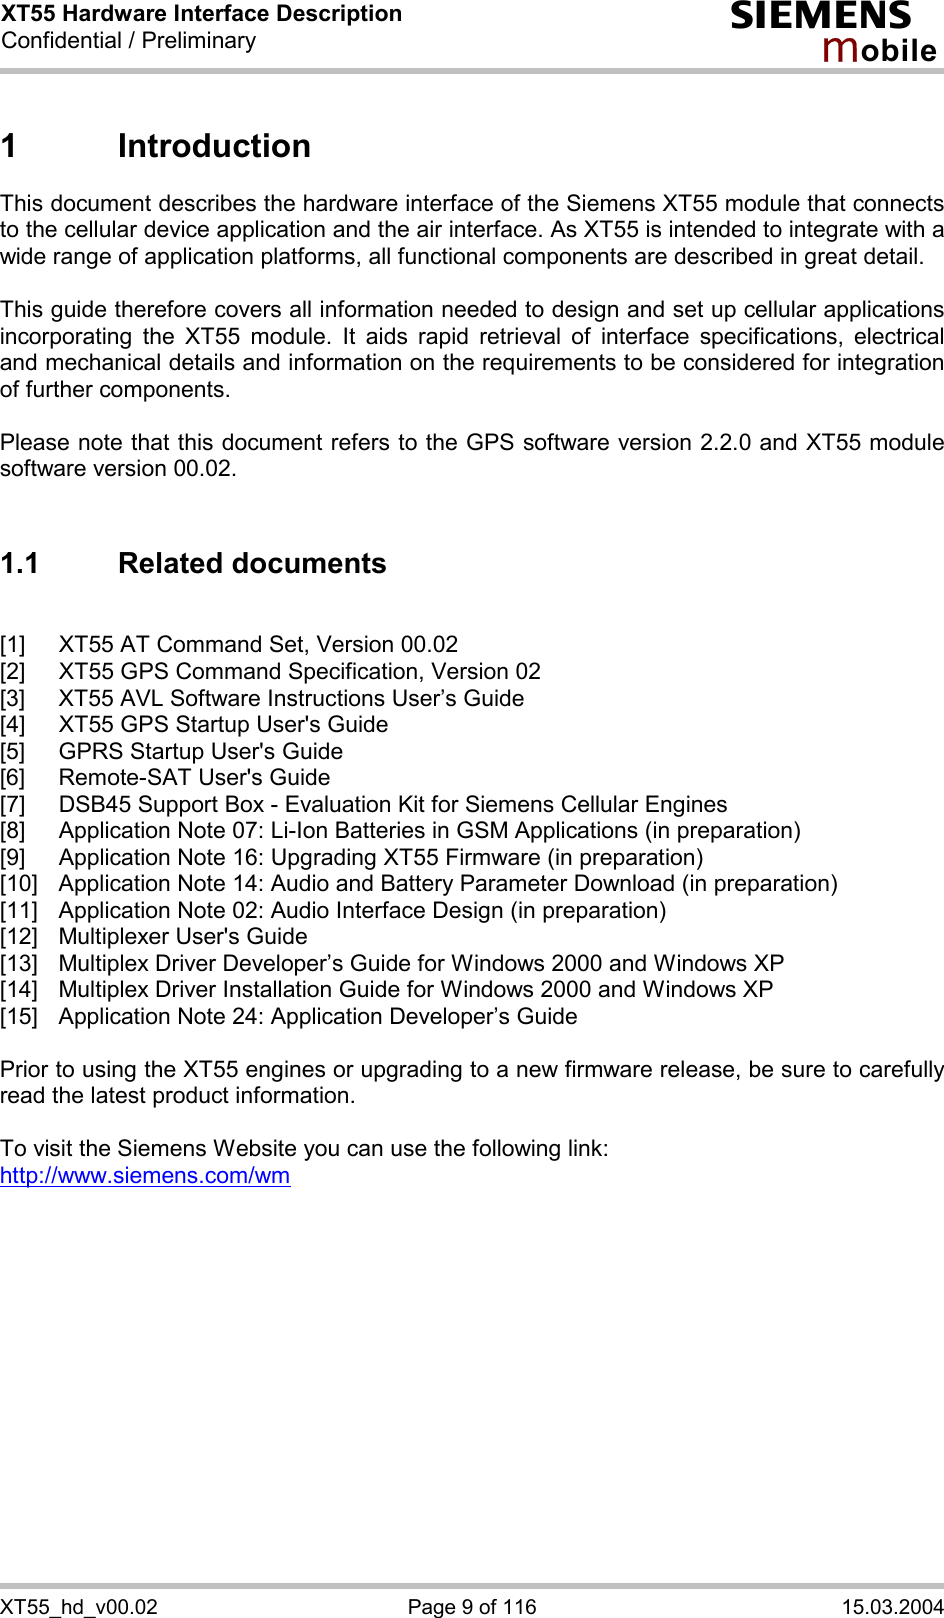 XT55 Hardware Interface Description Confidential / Preliminary s mo b i l e XT55_hd_v00.02  Page 9 of 116  15.03.2004 1 Introduction This document describes the hardware interface of the Siemens XT55 module that connects to the cellular device application and the air interface. As XT55 is intended to integrate with a wide range of application platforms, all functional components are described in great detail.  This guide therefore covers all information needed to design and set up cellular applications incorporating the XT55 module. It aids rapid retrieval of interface specifications, electrical and mechanical details and information on the requirements to be considered for integration of further components.   Please note that this document refers to the GPS software version 2.2.0 and XT55 module software version 00.02.  1.1 Related documents  [1]  XT55 AT Command Set, Version 00.02 [2]  XT55 GPS Command Specification, Version 02 [3]  XT55 AVL Software Instructions User’s Guide [4]  XT55 GPS Startup User&apos;s Guide [5]  GPRS Startup User&apos;s Guide [6]  Remote-SAT User&apos;s Guide [7]  DSB45 Support Box - Evaluation Kit for Siemens Cellular Engines [8]  Application Note 07: Li-Ion Batteries in GSM Applications (in preparation) [9]  Application Note 16: Upgrading XT55 Firmware (in preparation) [10]  Application Note 14: Audio and Battery Parameter Download (in preparation) [11]  Application Note 02: Audio Interface Design (in preparation) [12]  Multiplexer User&apos;s Guide [13]  Multiplex Driver Developer’s Guide for Windows 2000 and Windows XP [14]  Multiplex Driver Installation Guide for Windows 2000 and Windows XP [15]  Application Note 24: Application Developer’s Guide  Prior to using the XT55 engines or upgrading to a new firmware release, be sure to carefully read the latest product information.  To visit the Siemens Website you can use the following link: http://www.siemens.com/wm   